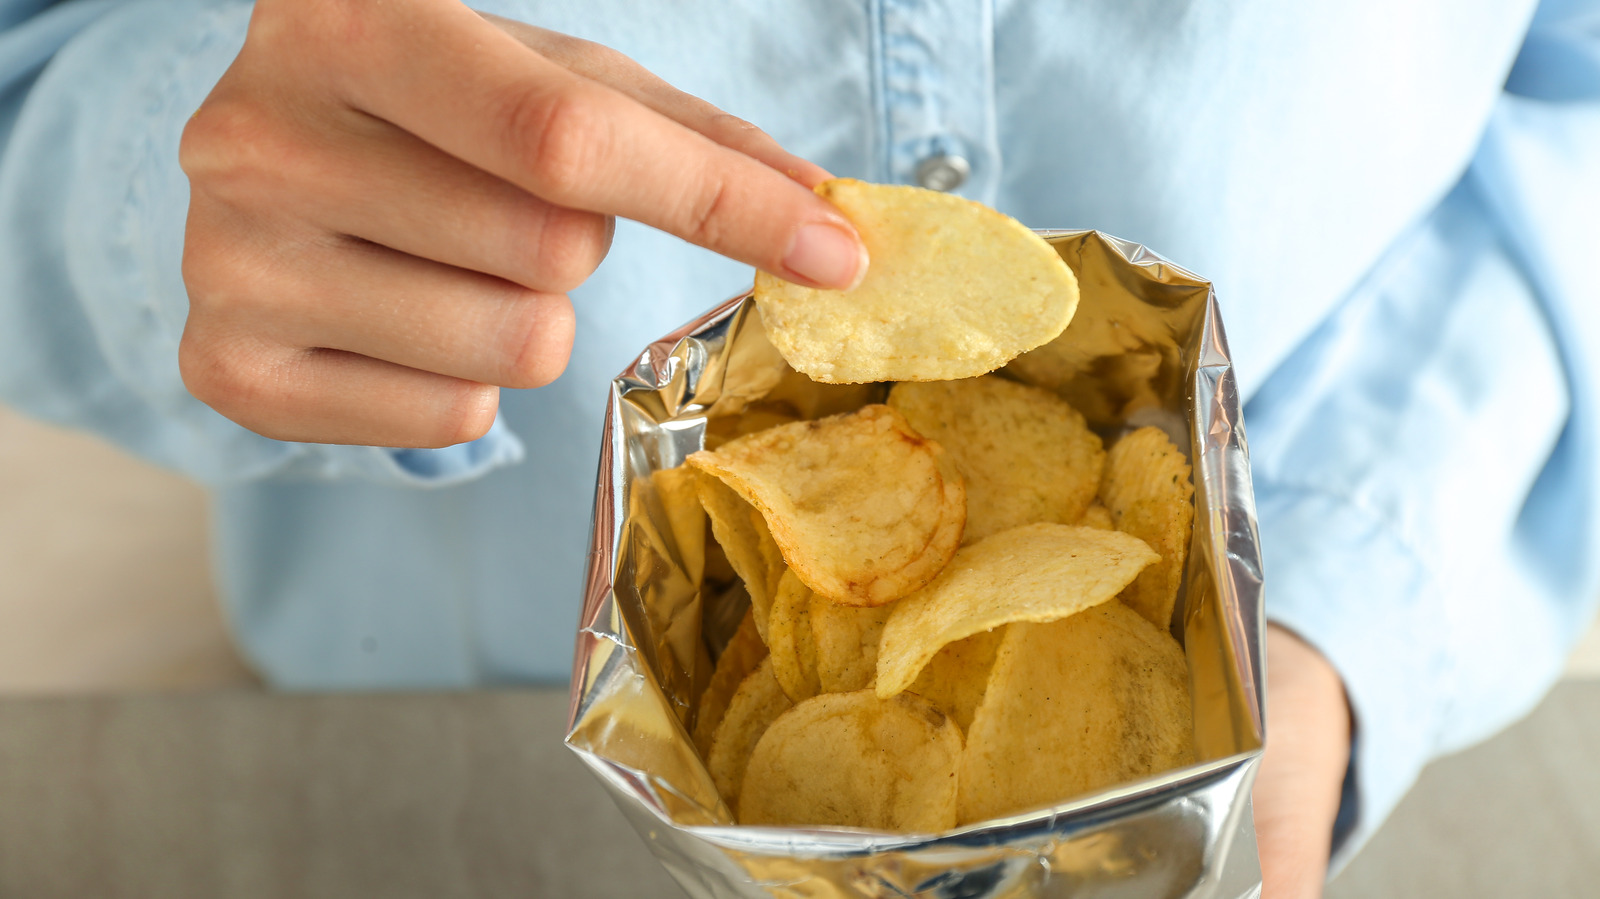 https://www.tastingtable.com/img/gallery/the-reason-your-potato-chips-bags-are-never-fully-filled/l-intro-1641582727.jpg